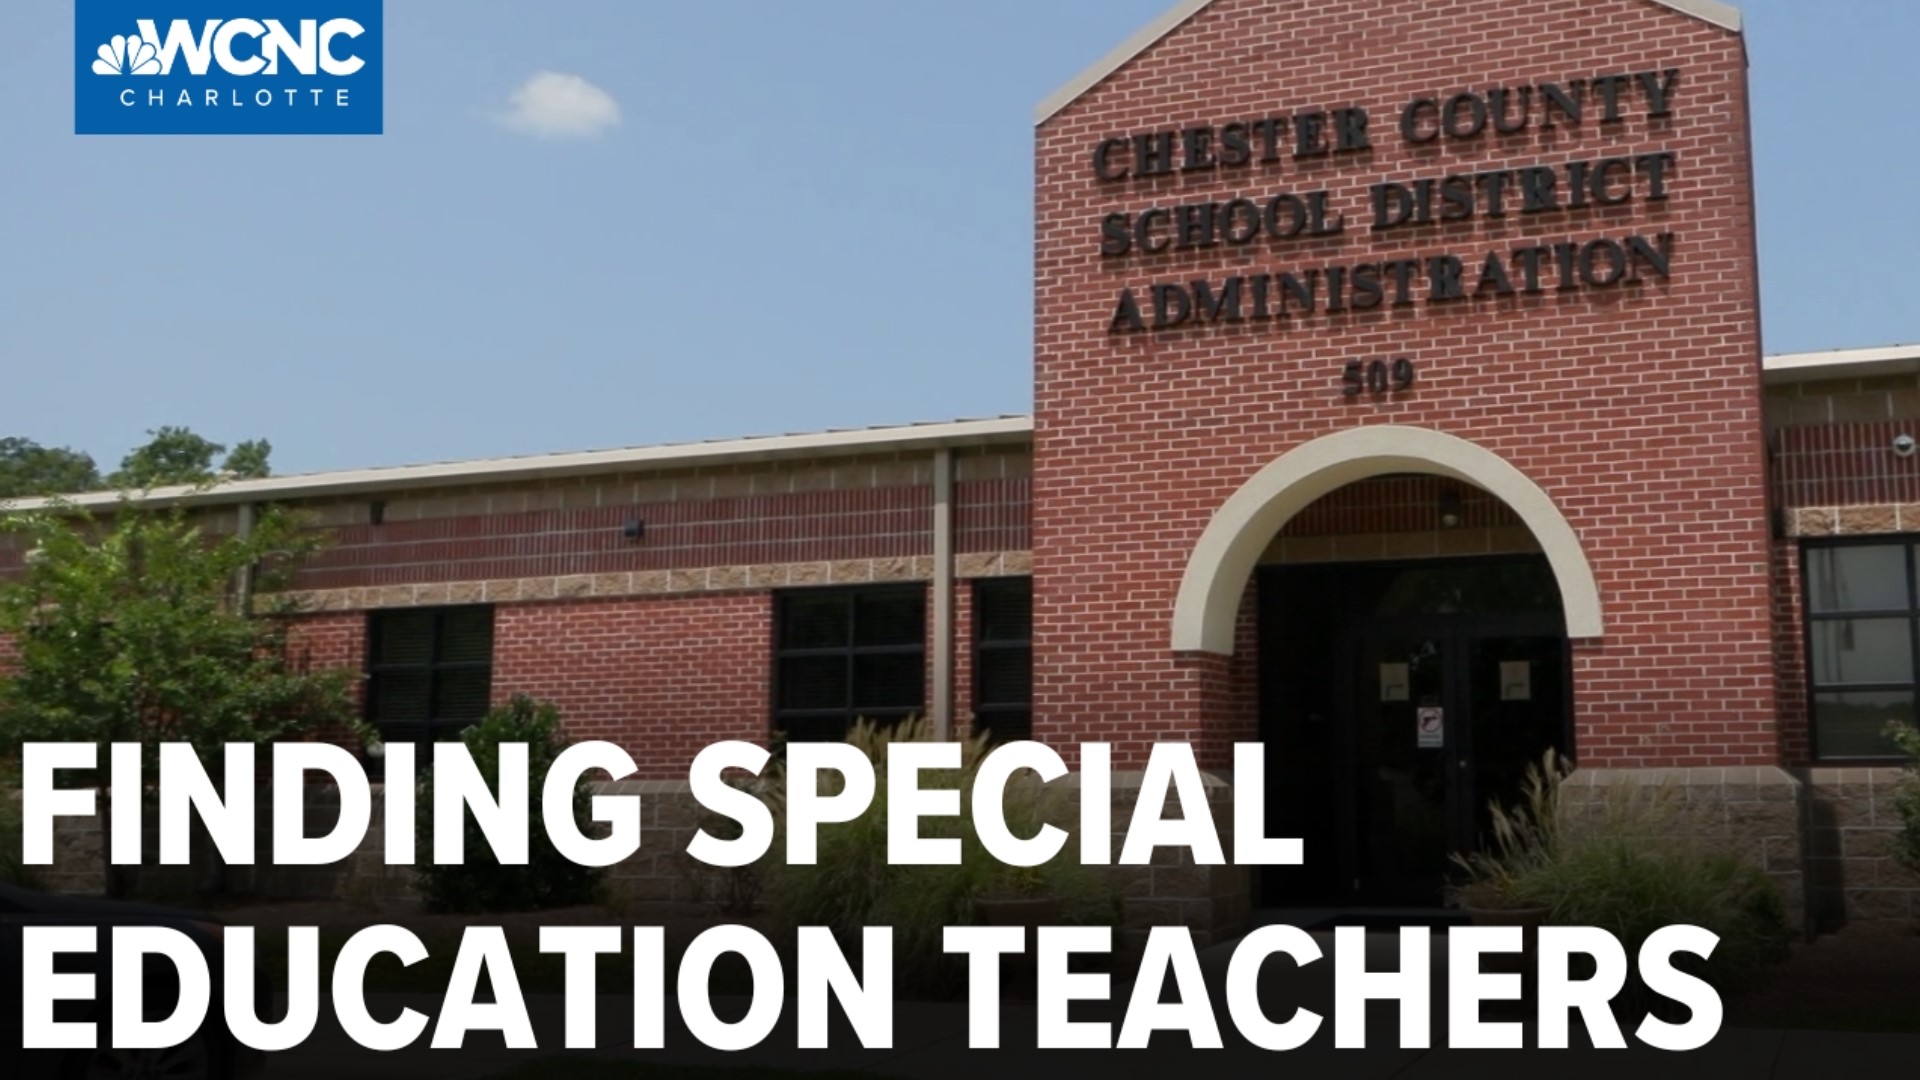 Thousands of school districts across the country are preparing to provide special education services for the upcoming school year.